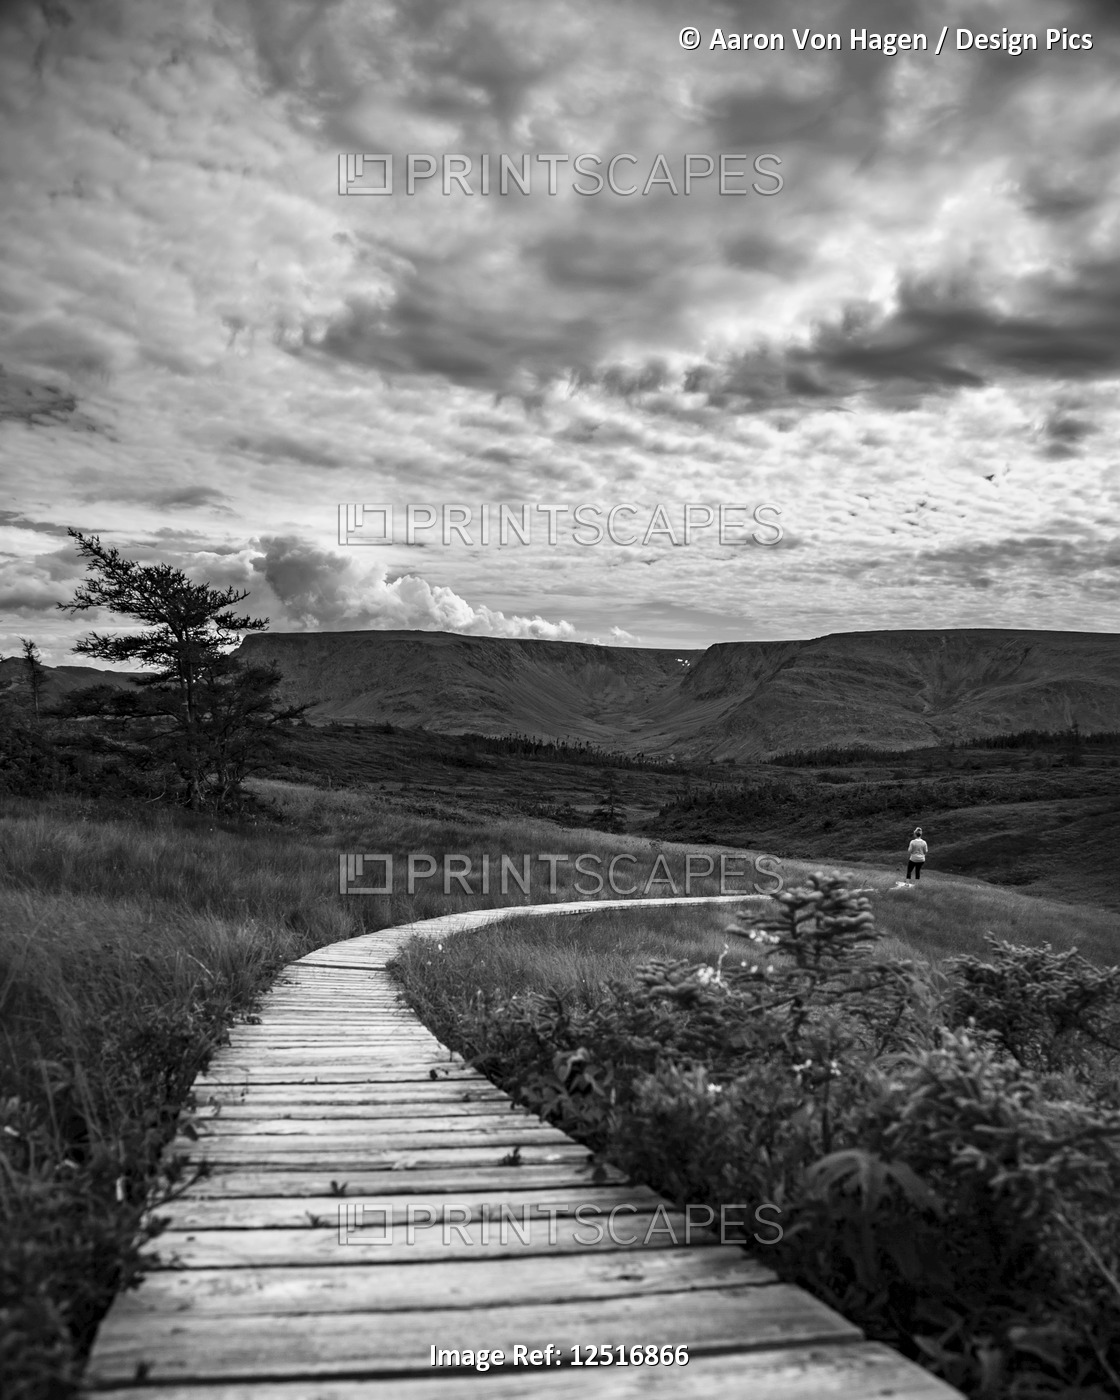 Black and white image of a wooden boardwalk stretching across a landscape with ...